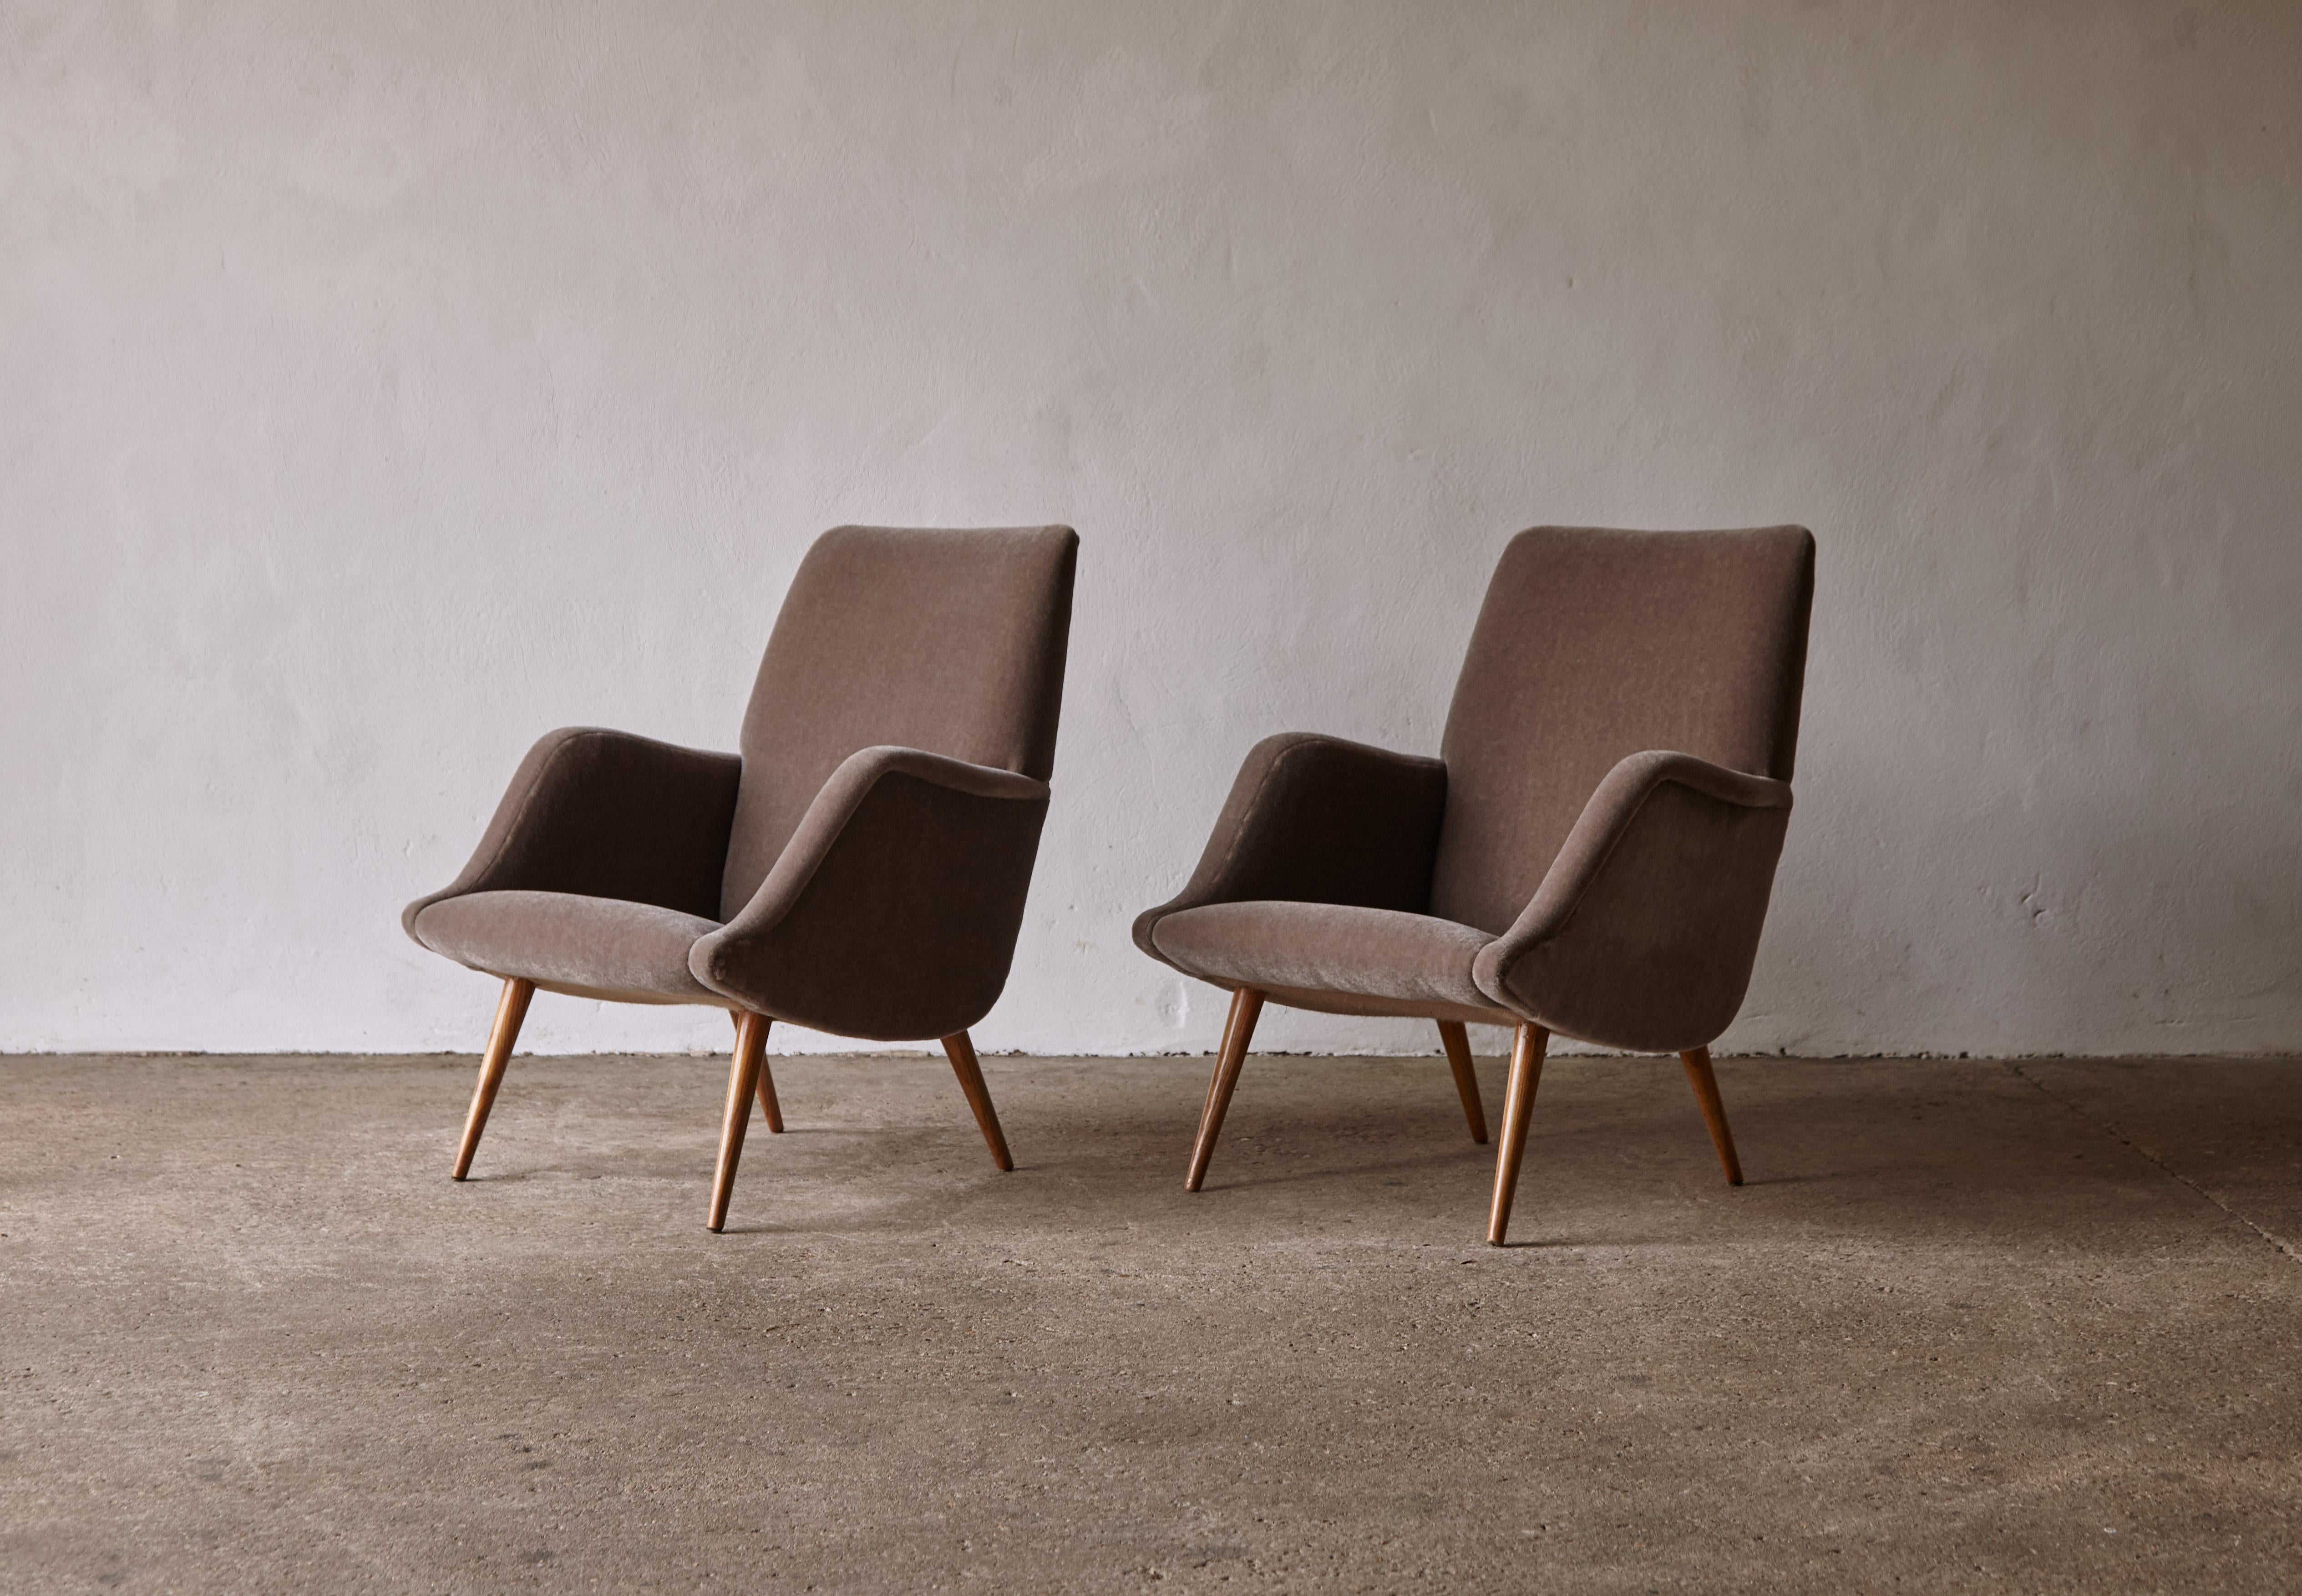 Italian Carlo de Carli Model 806 Chairs, Produced by Cassina, Italy, 1950s For Sale